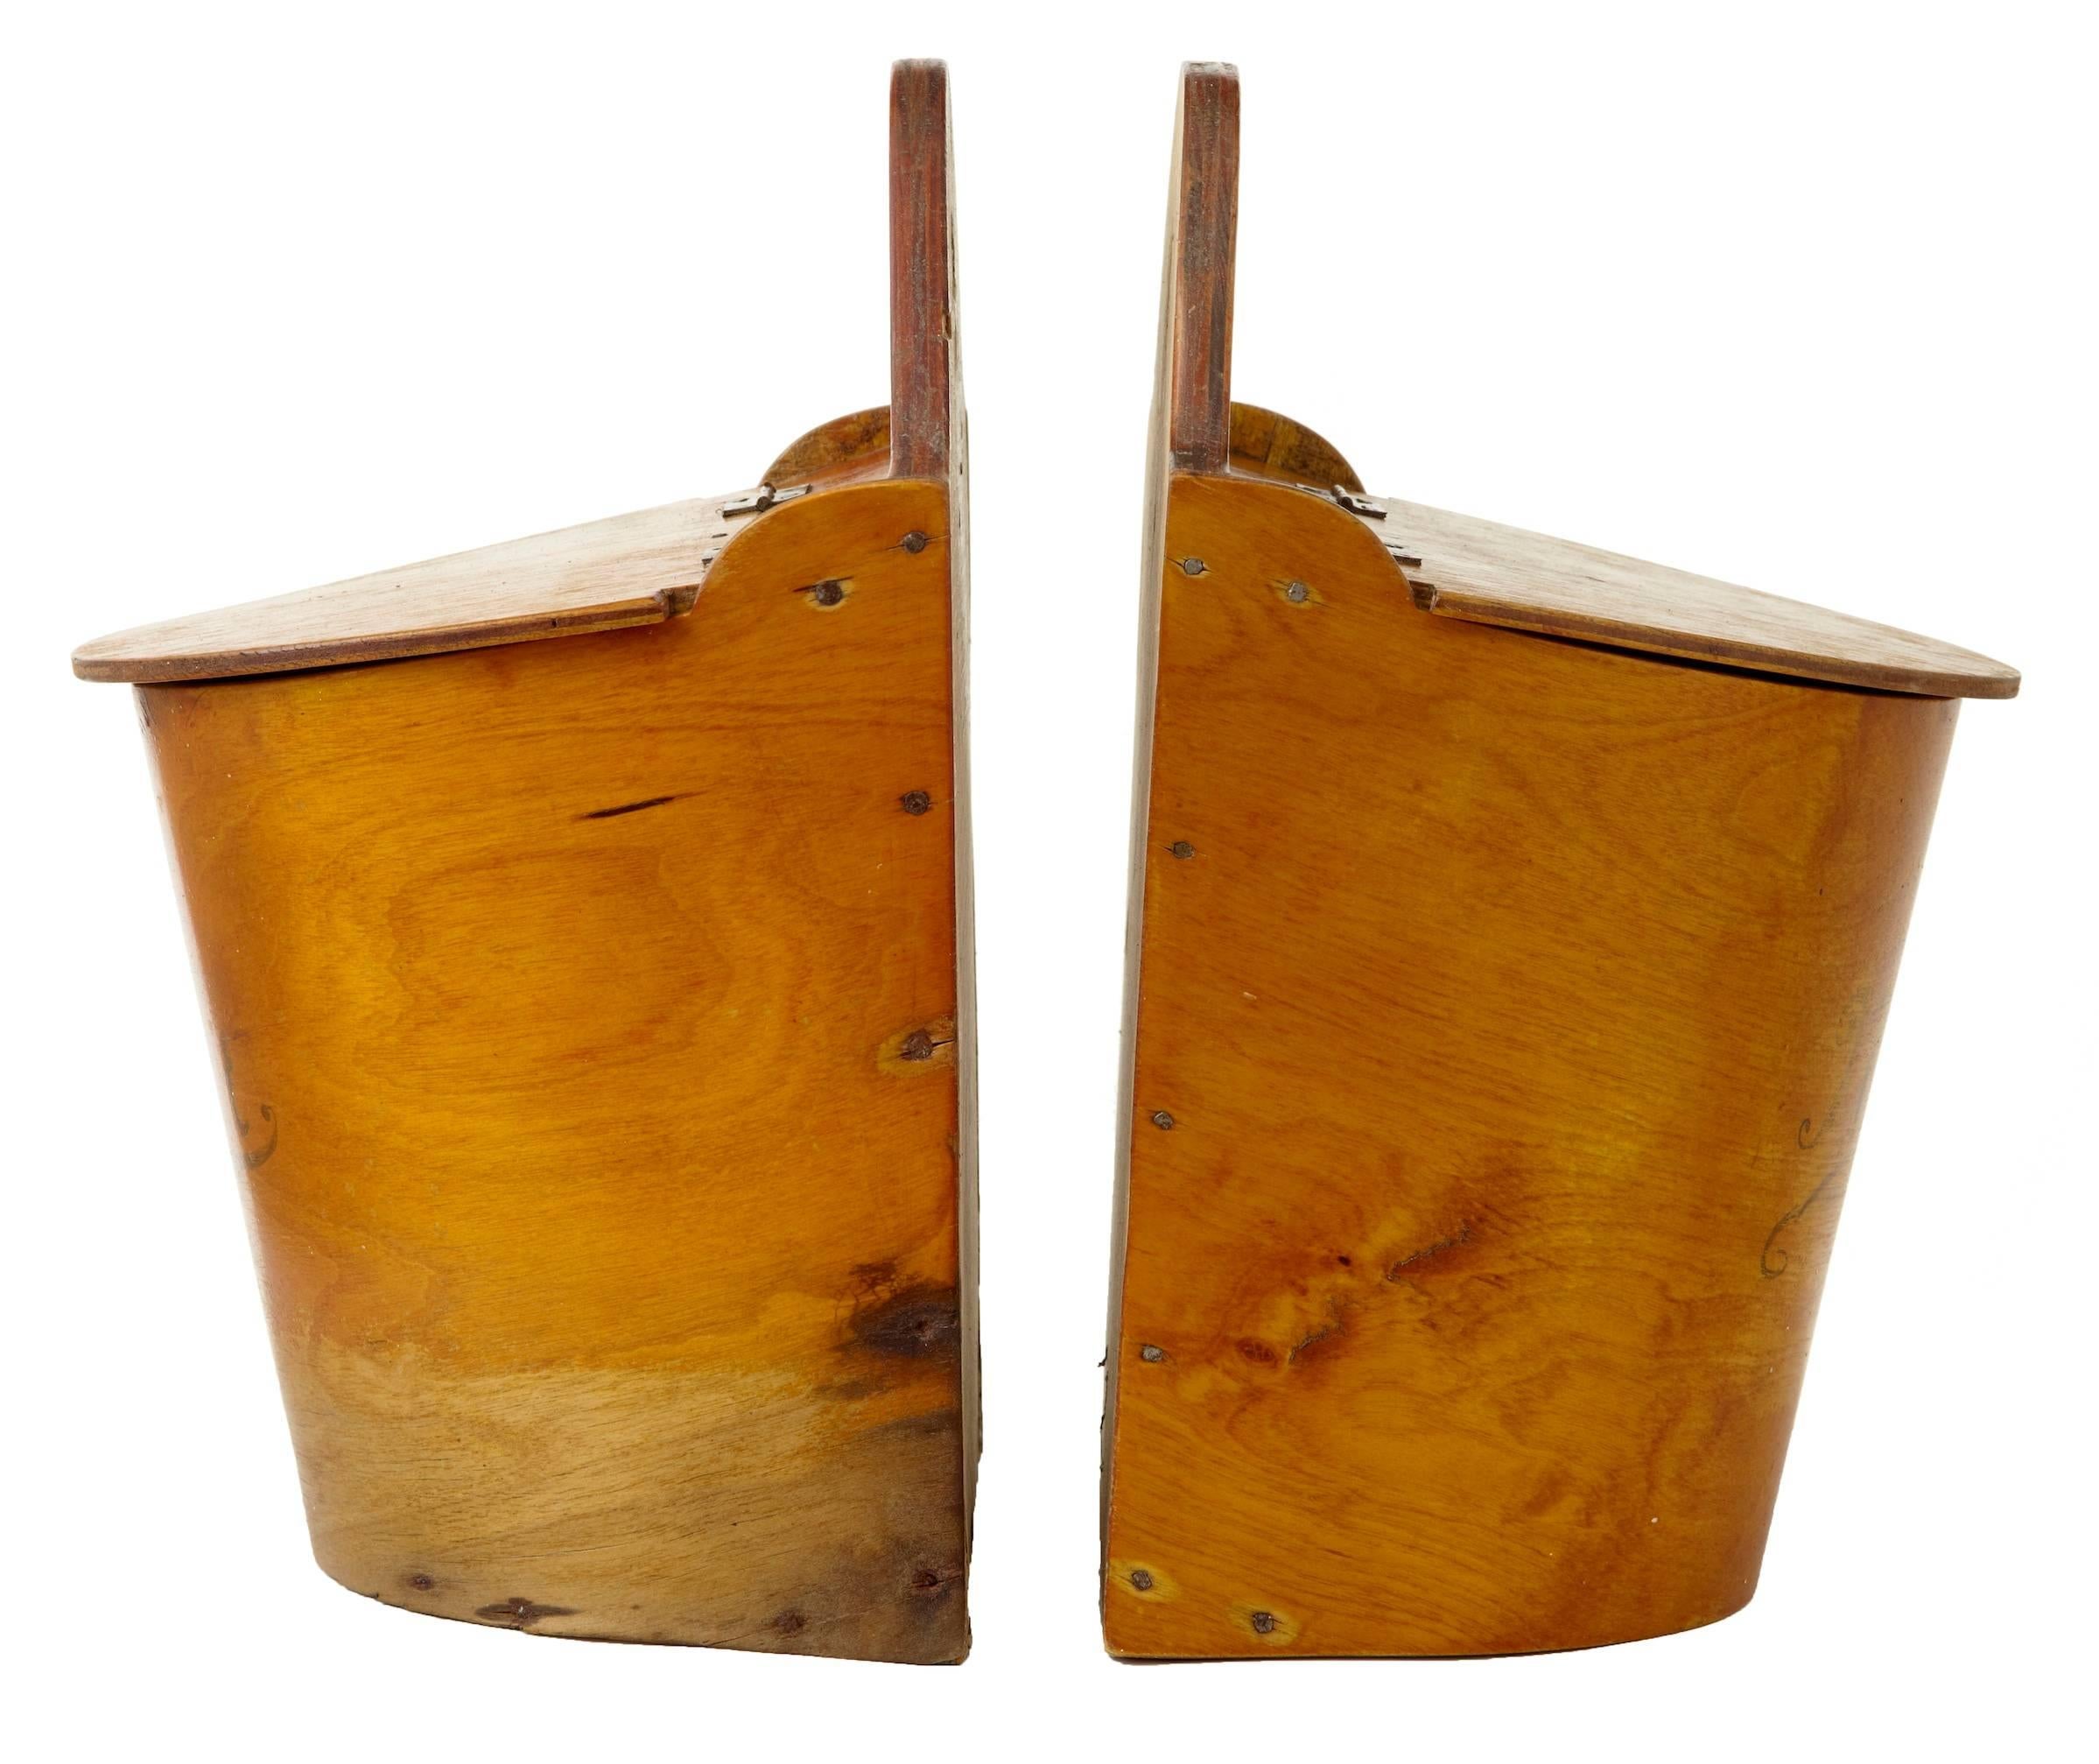 Rare pair of salt and pepper containers, circa 1895. Great piece for decoration in the kitchen. Golden birch color with original writing on the front. Some staining to wood in places.

Measures: Height 10